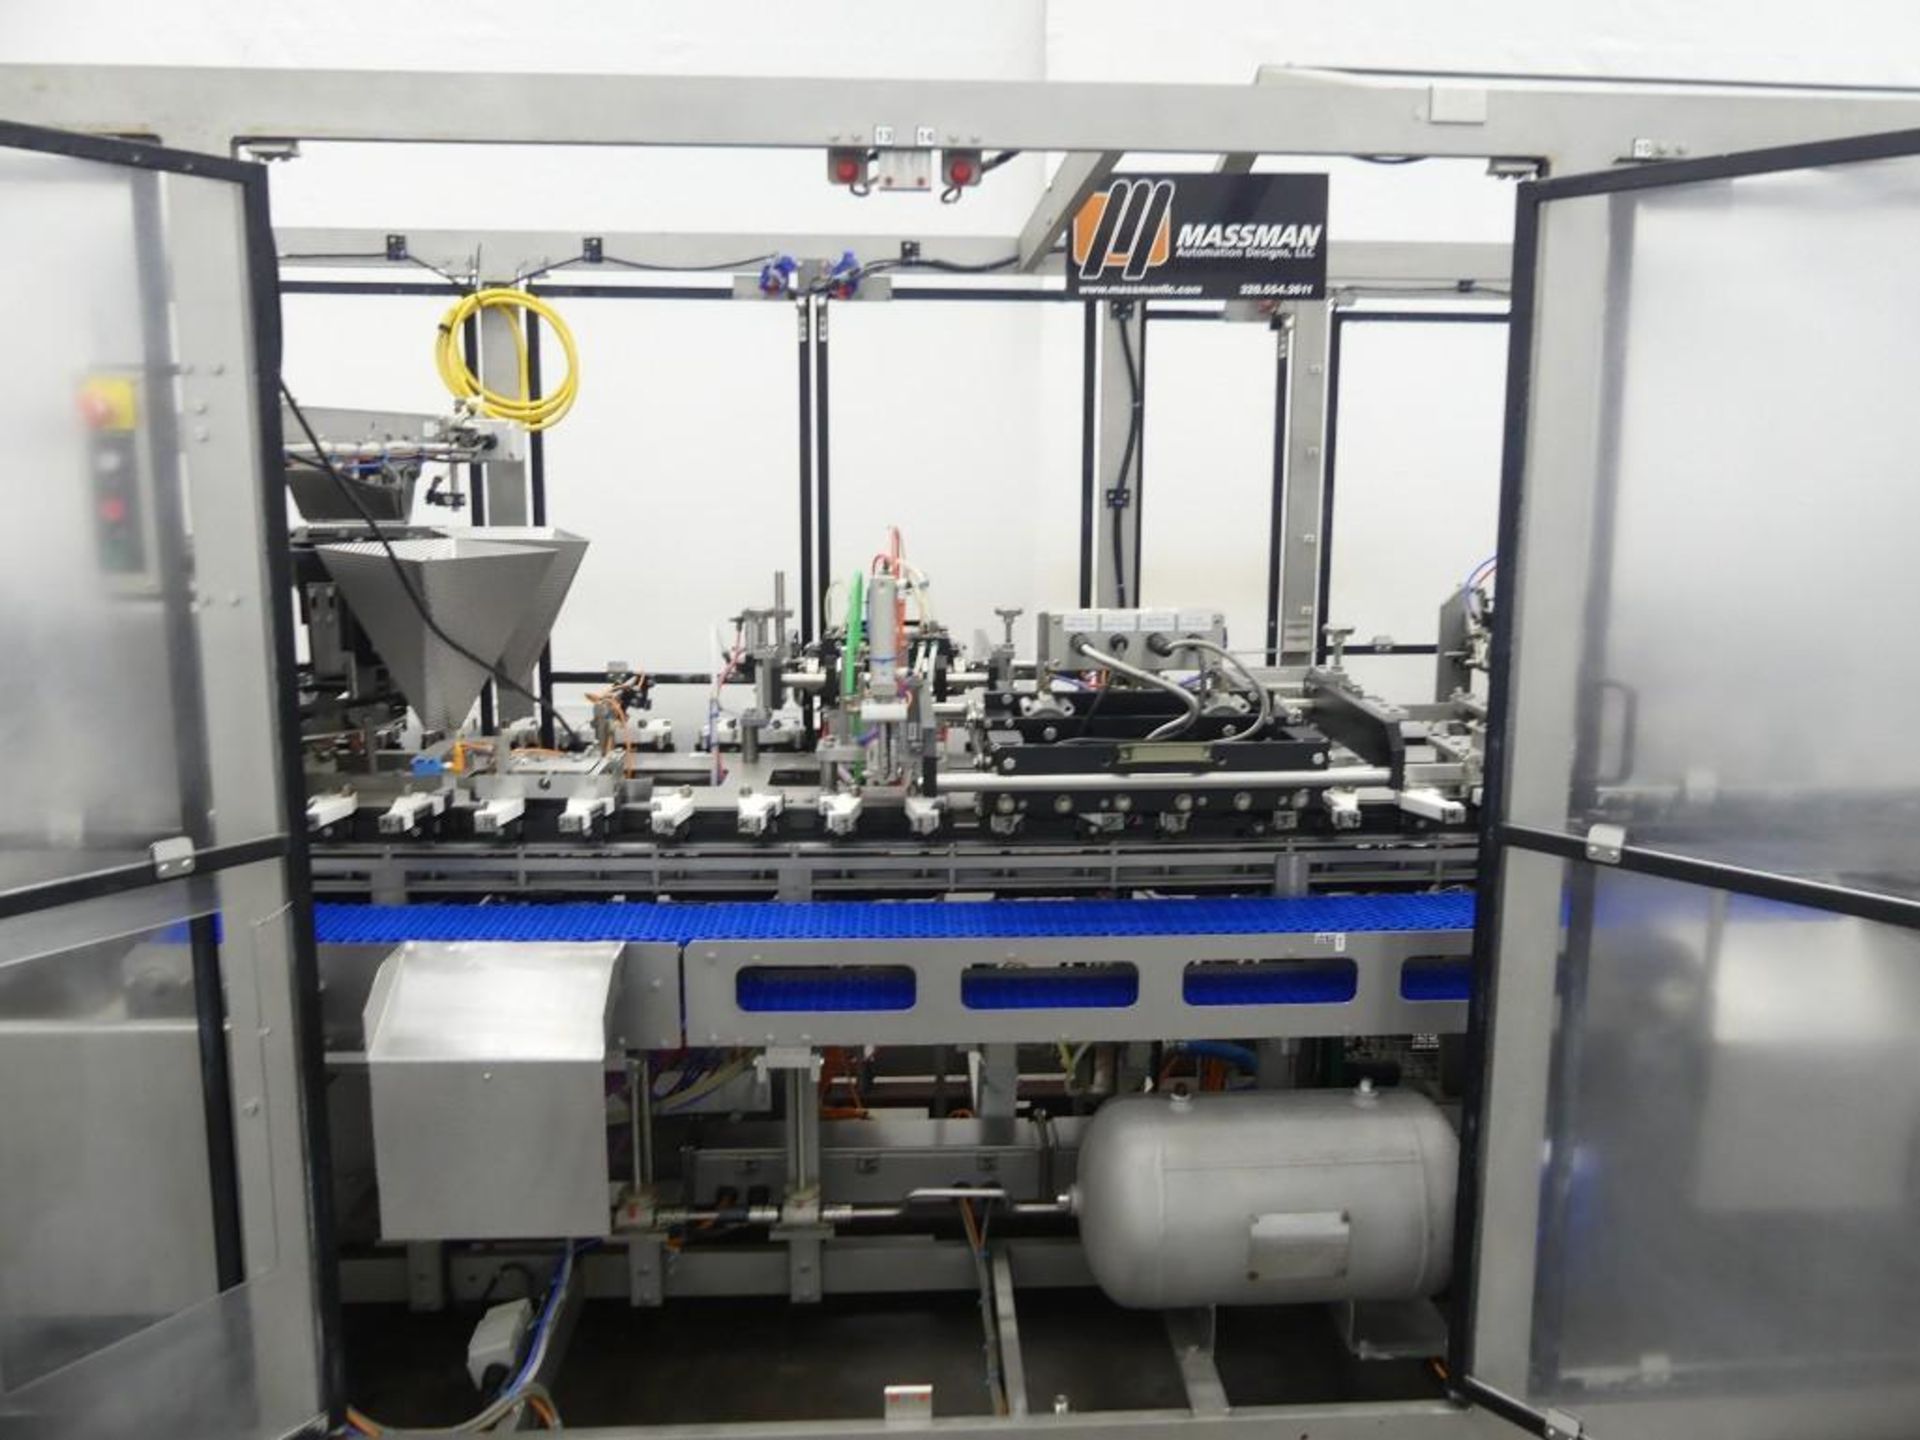 Massman HFFS-IM1000 Flexible Pouch Packaging System - Image 39 of 127